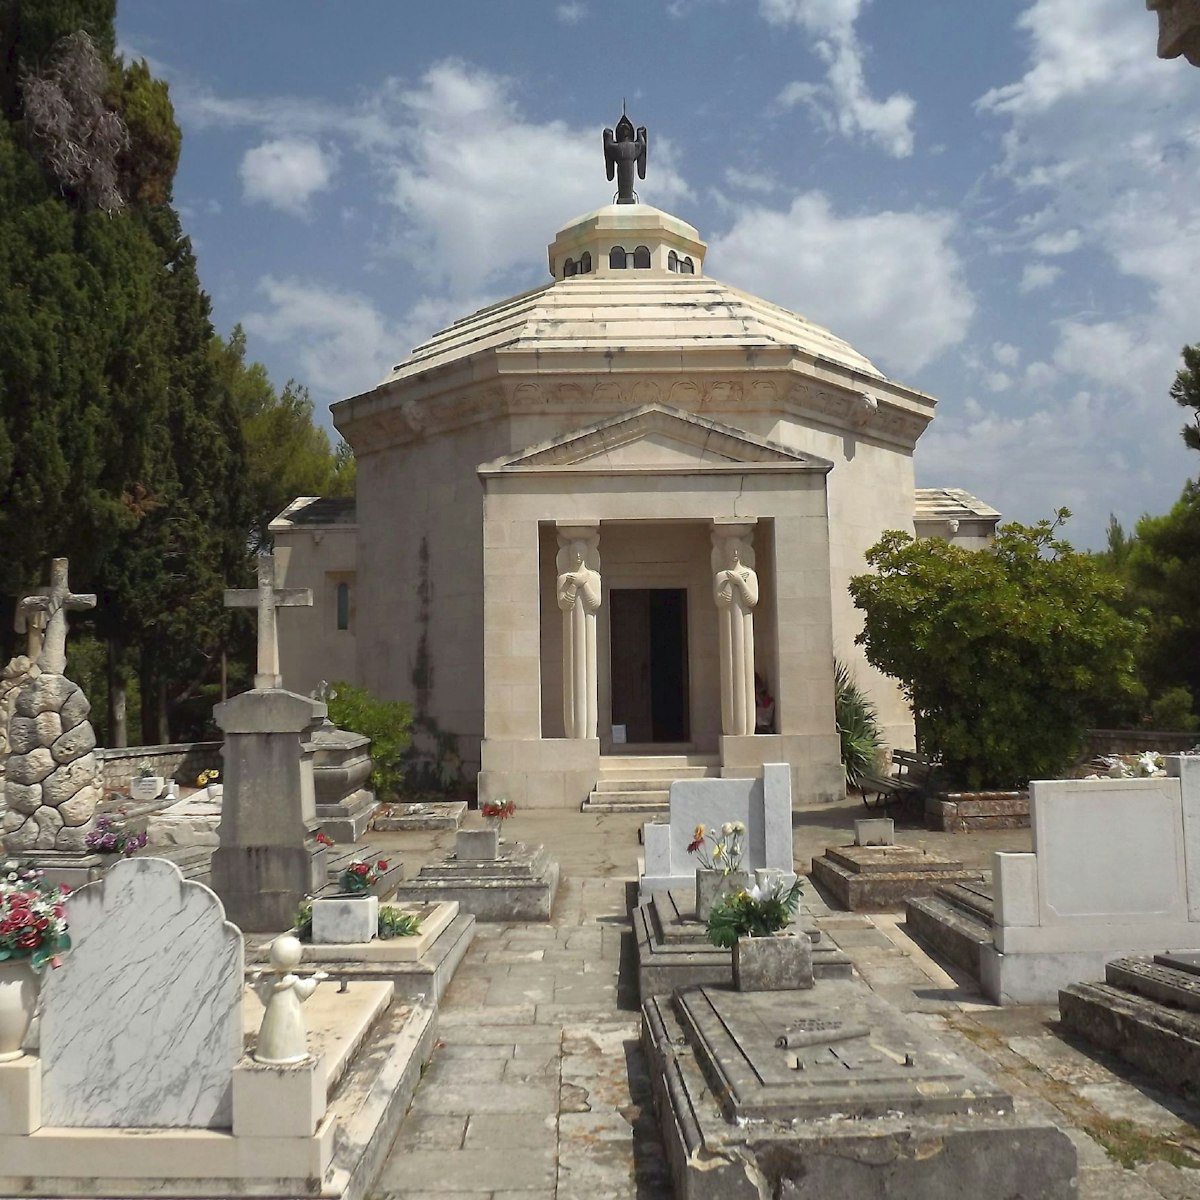 View of the mausoleum